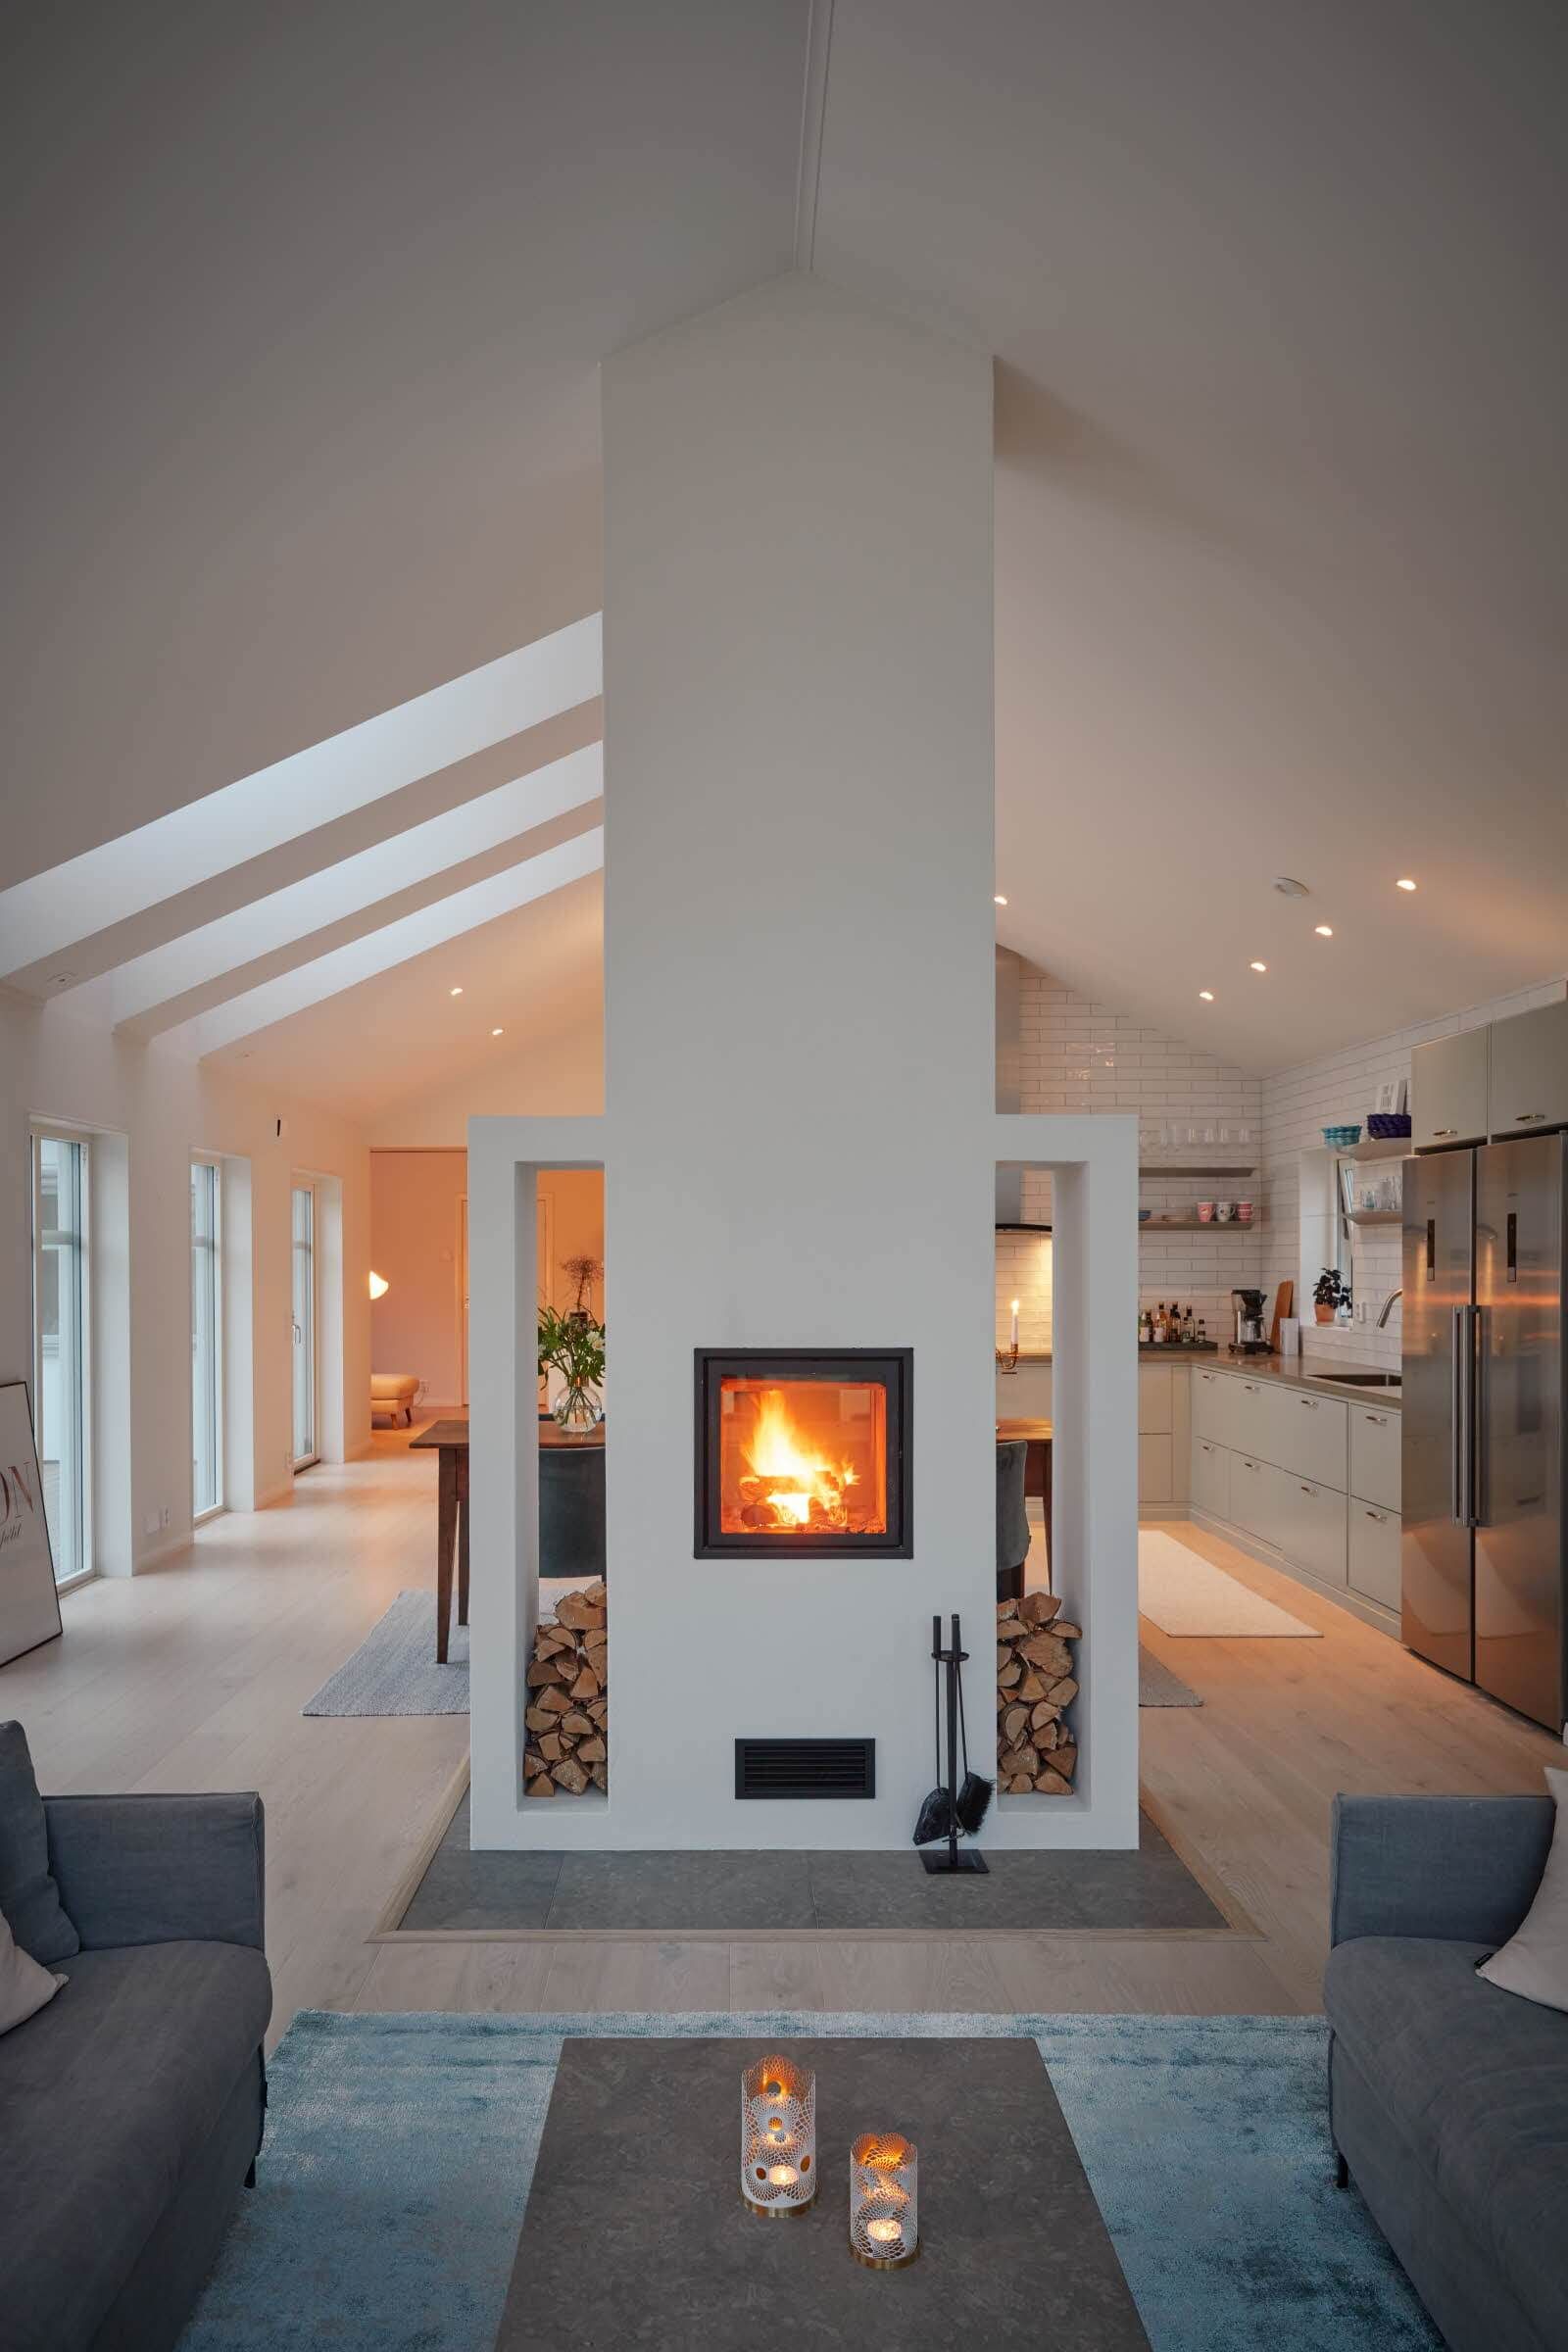 Two Sided Fireplace Inspirational 16 Gorgeous Double Sided Fireplace Design Ideas Take A Look